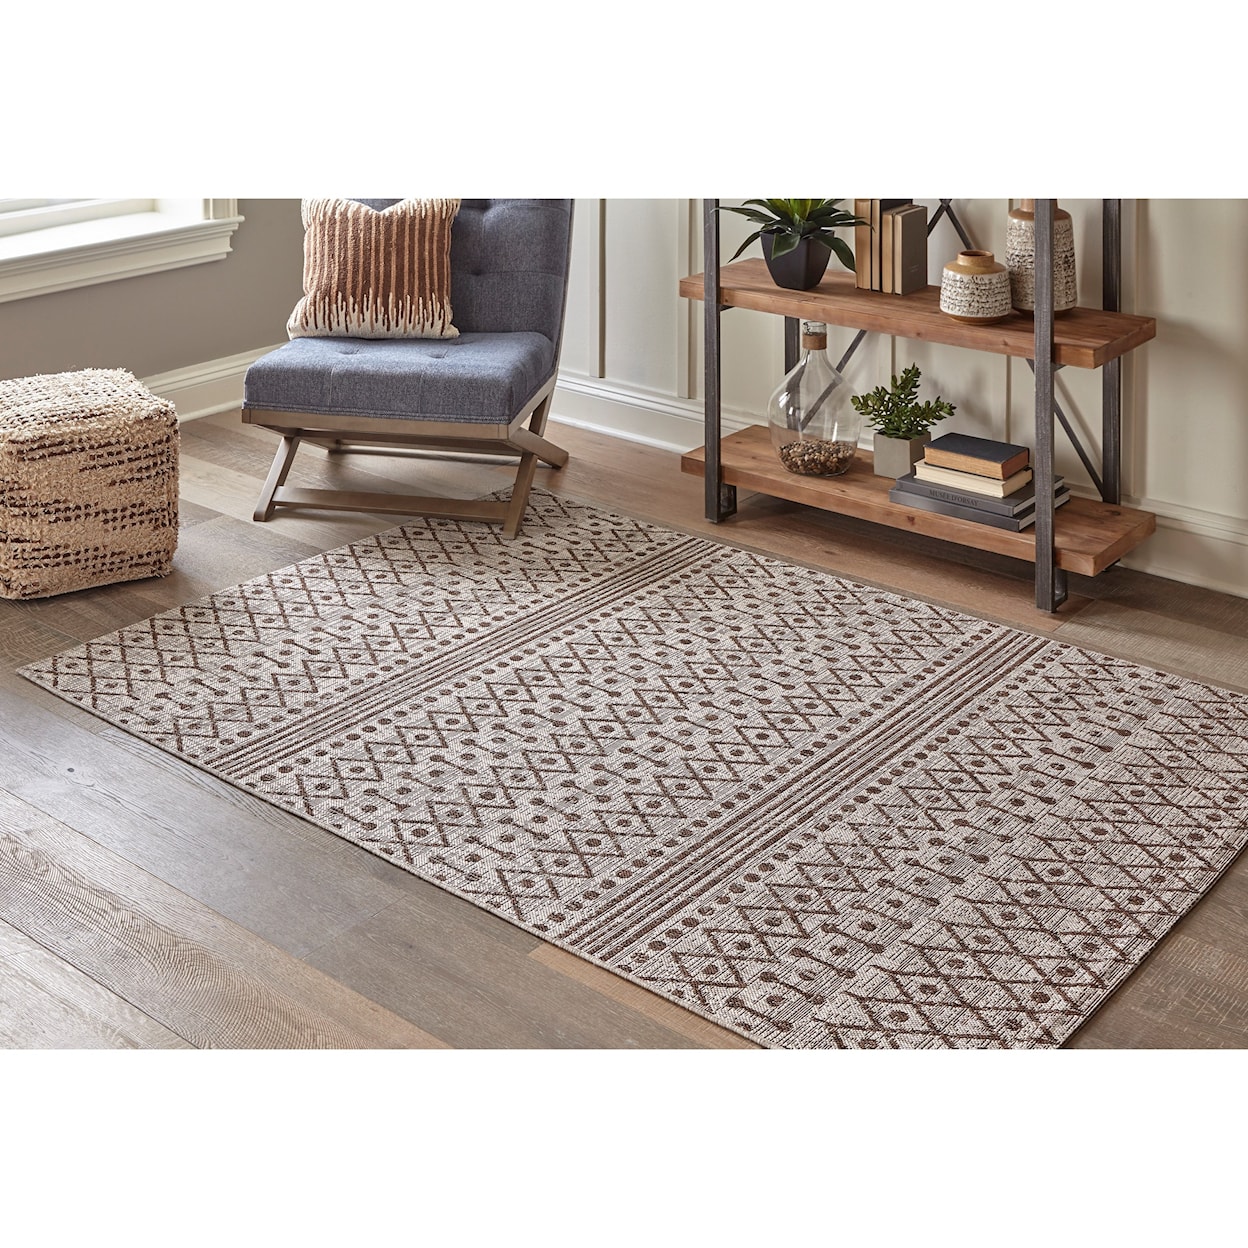 Ashley Furniture Signature Design Casual Area Rugs Dubot Tan/Brown Indoor/Outdoor Large Rug